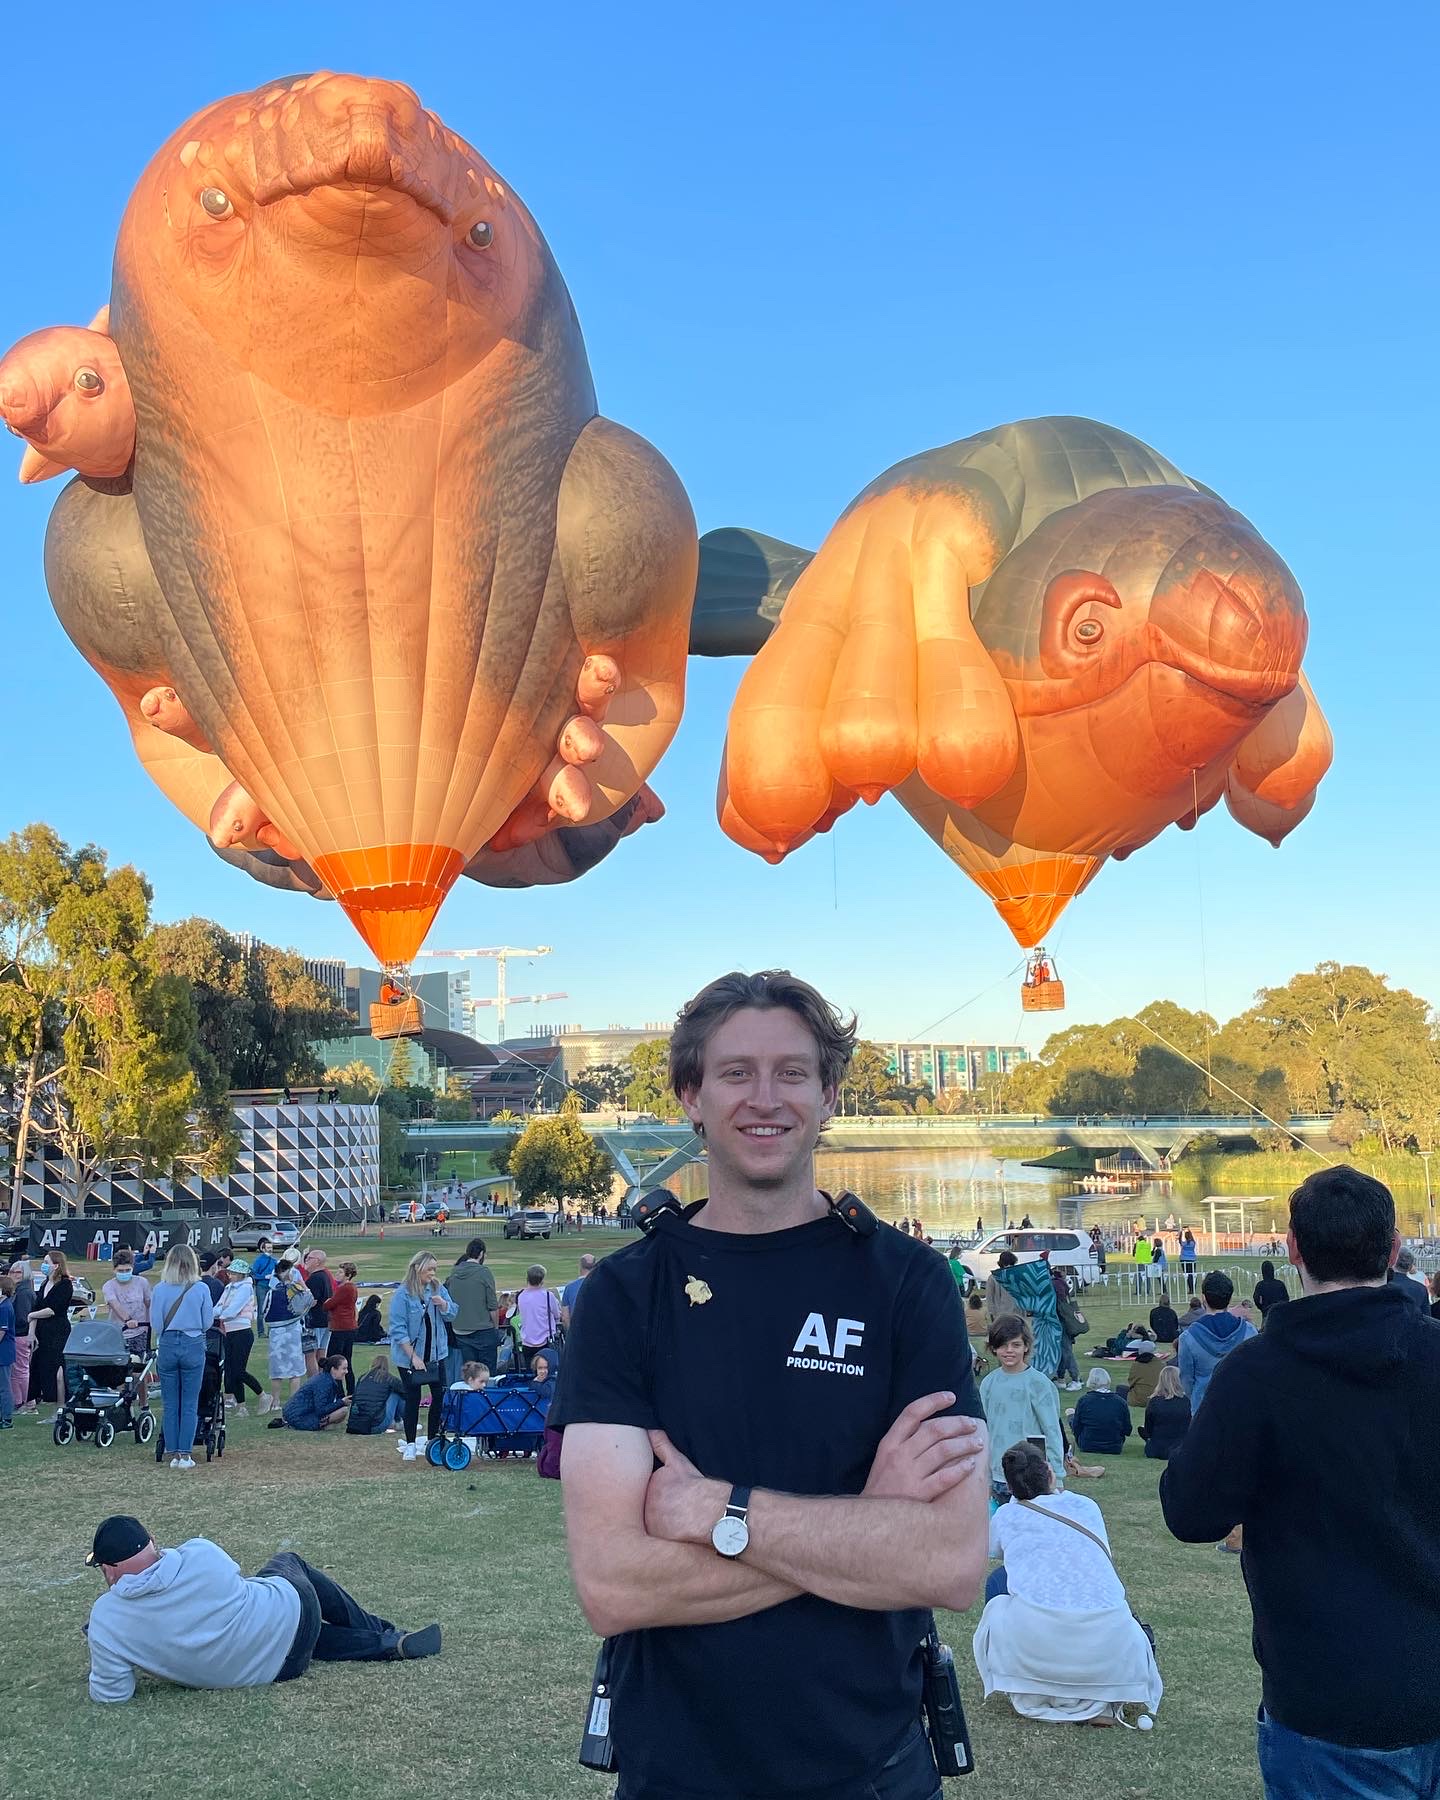 Connor Jolly standing in a park with animal-shaped hot air balloons floating behind him